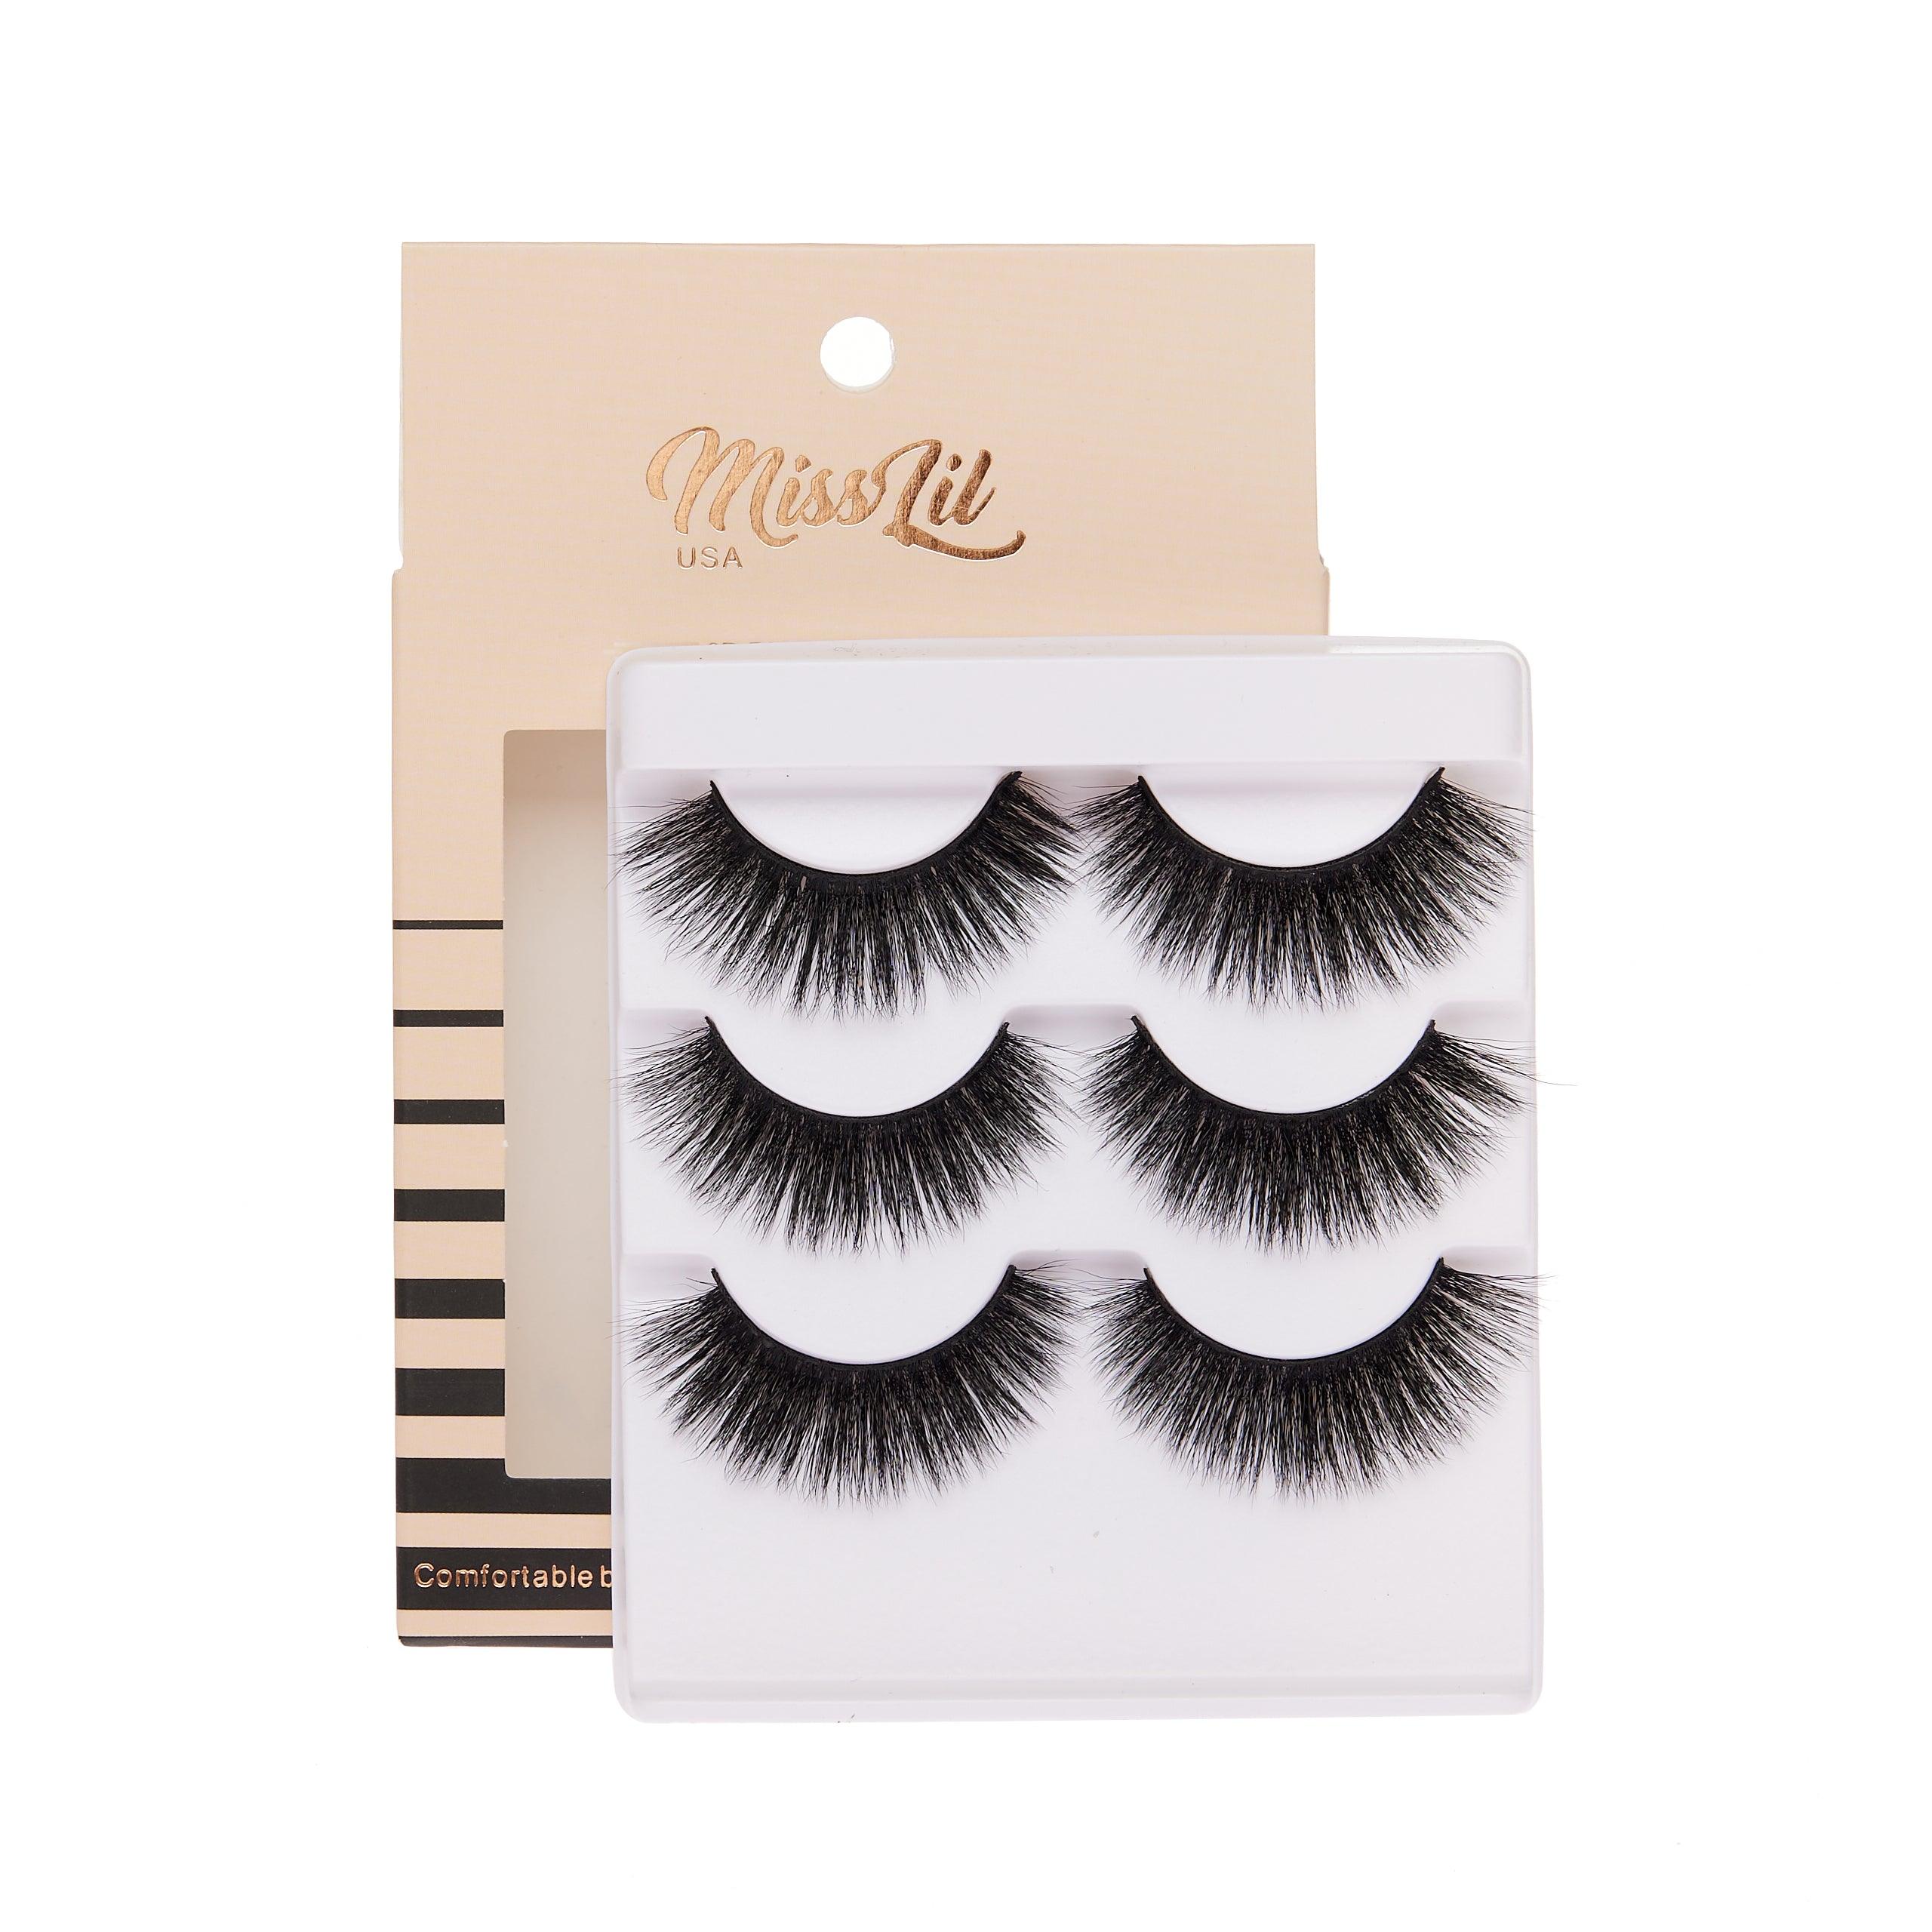 3-Pair Faux 9D Mink Eyelashes - Luxury Collection #22 - Pack of 3 - Miss Lil USA